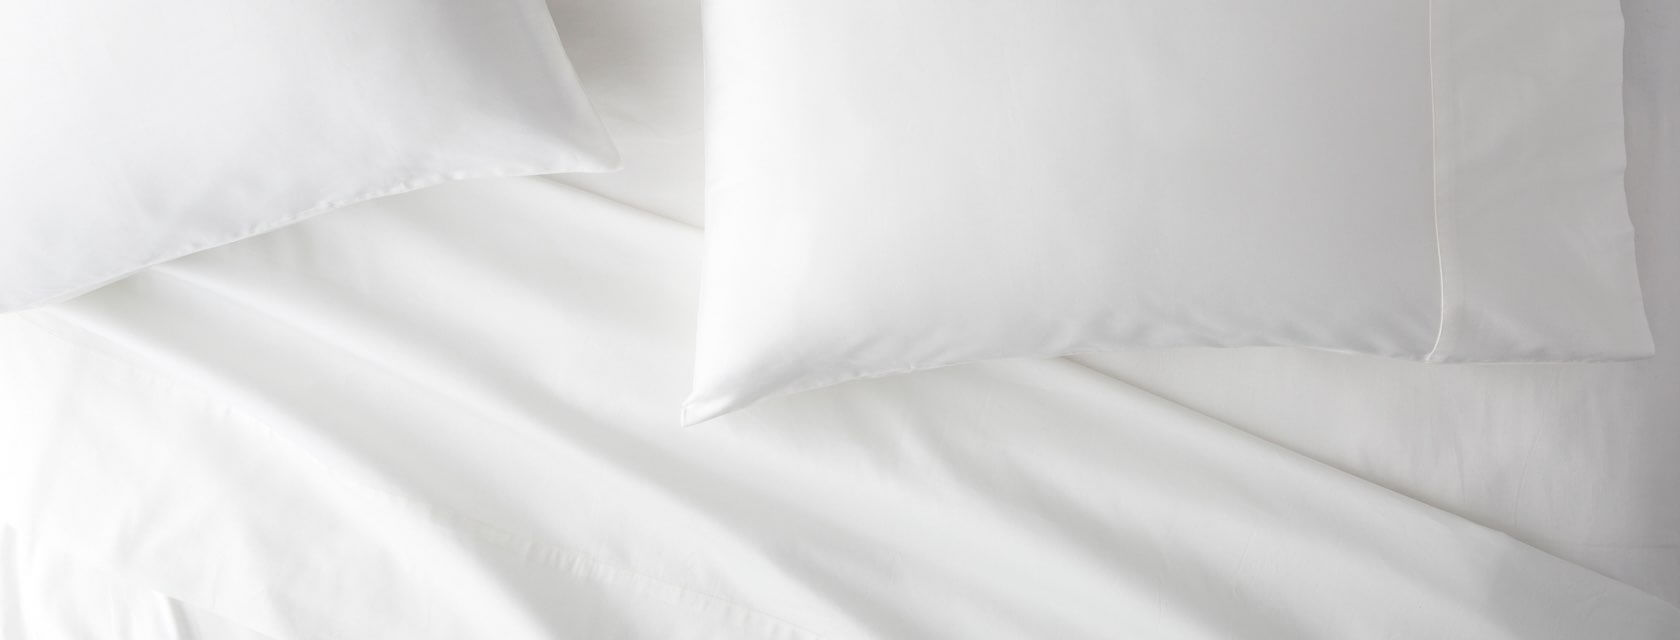 Saatva sheets and pillows on a bed.